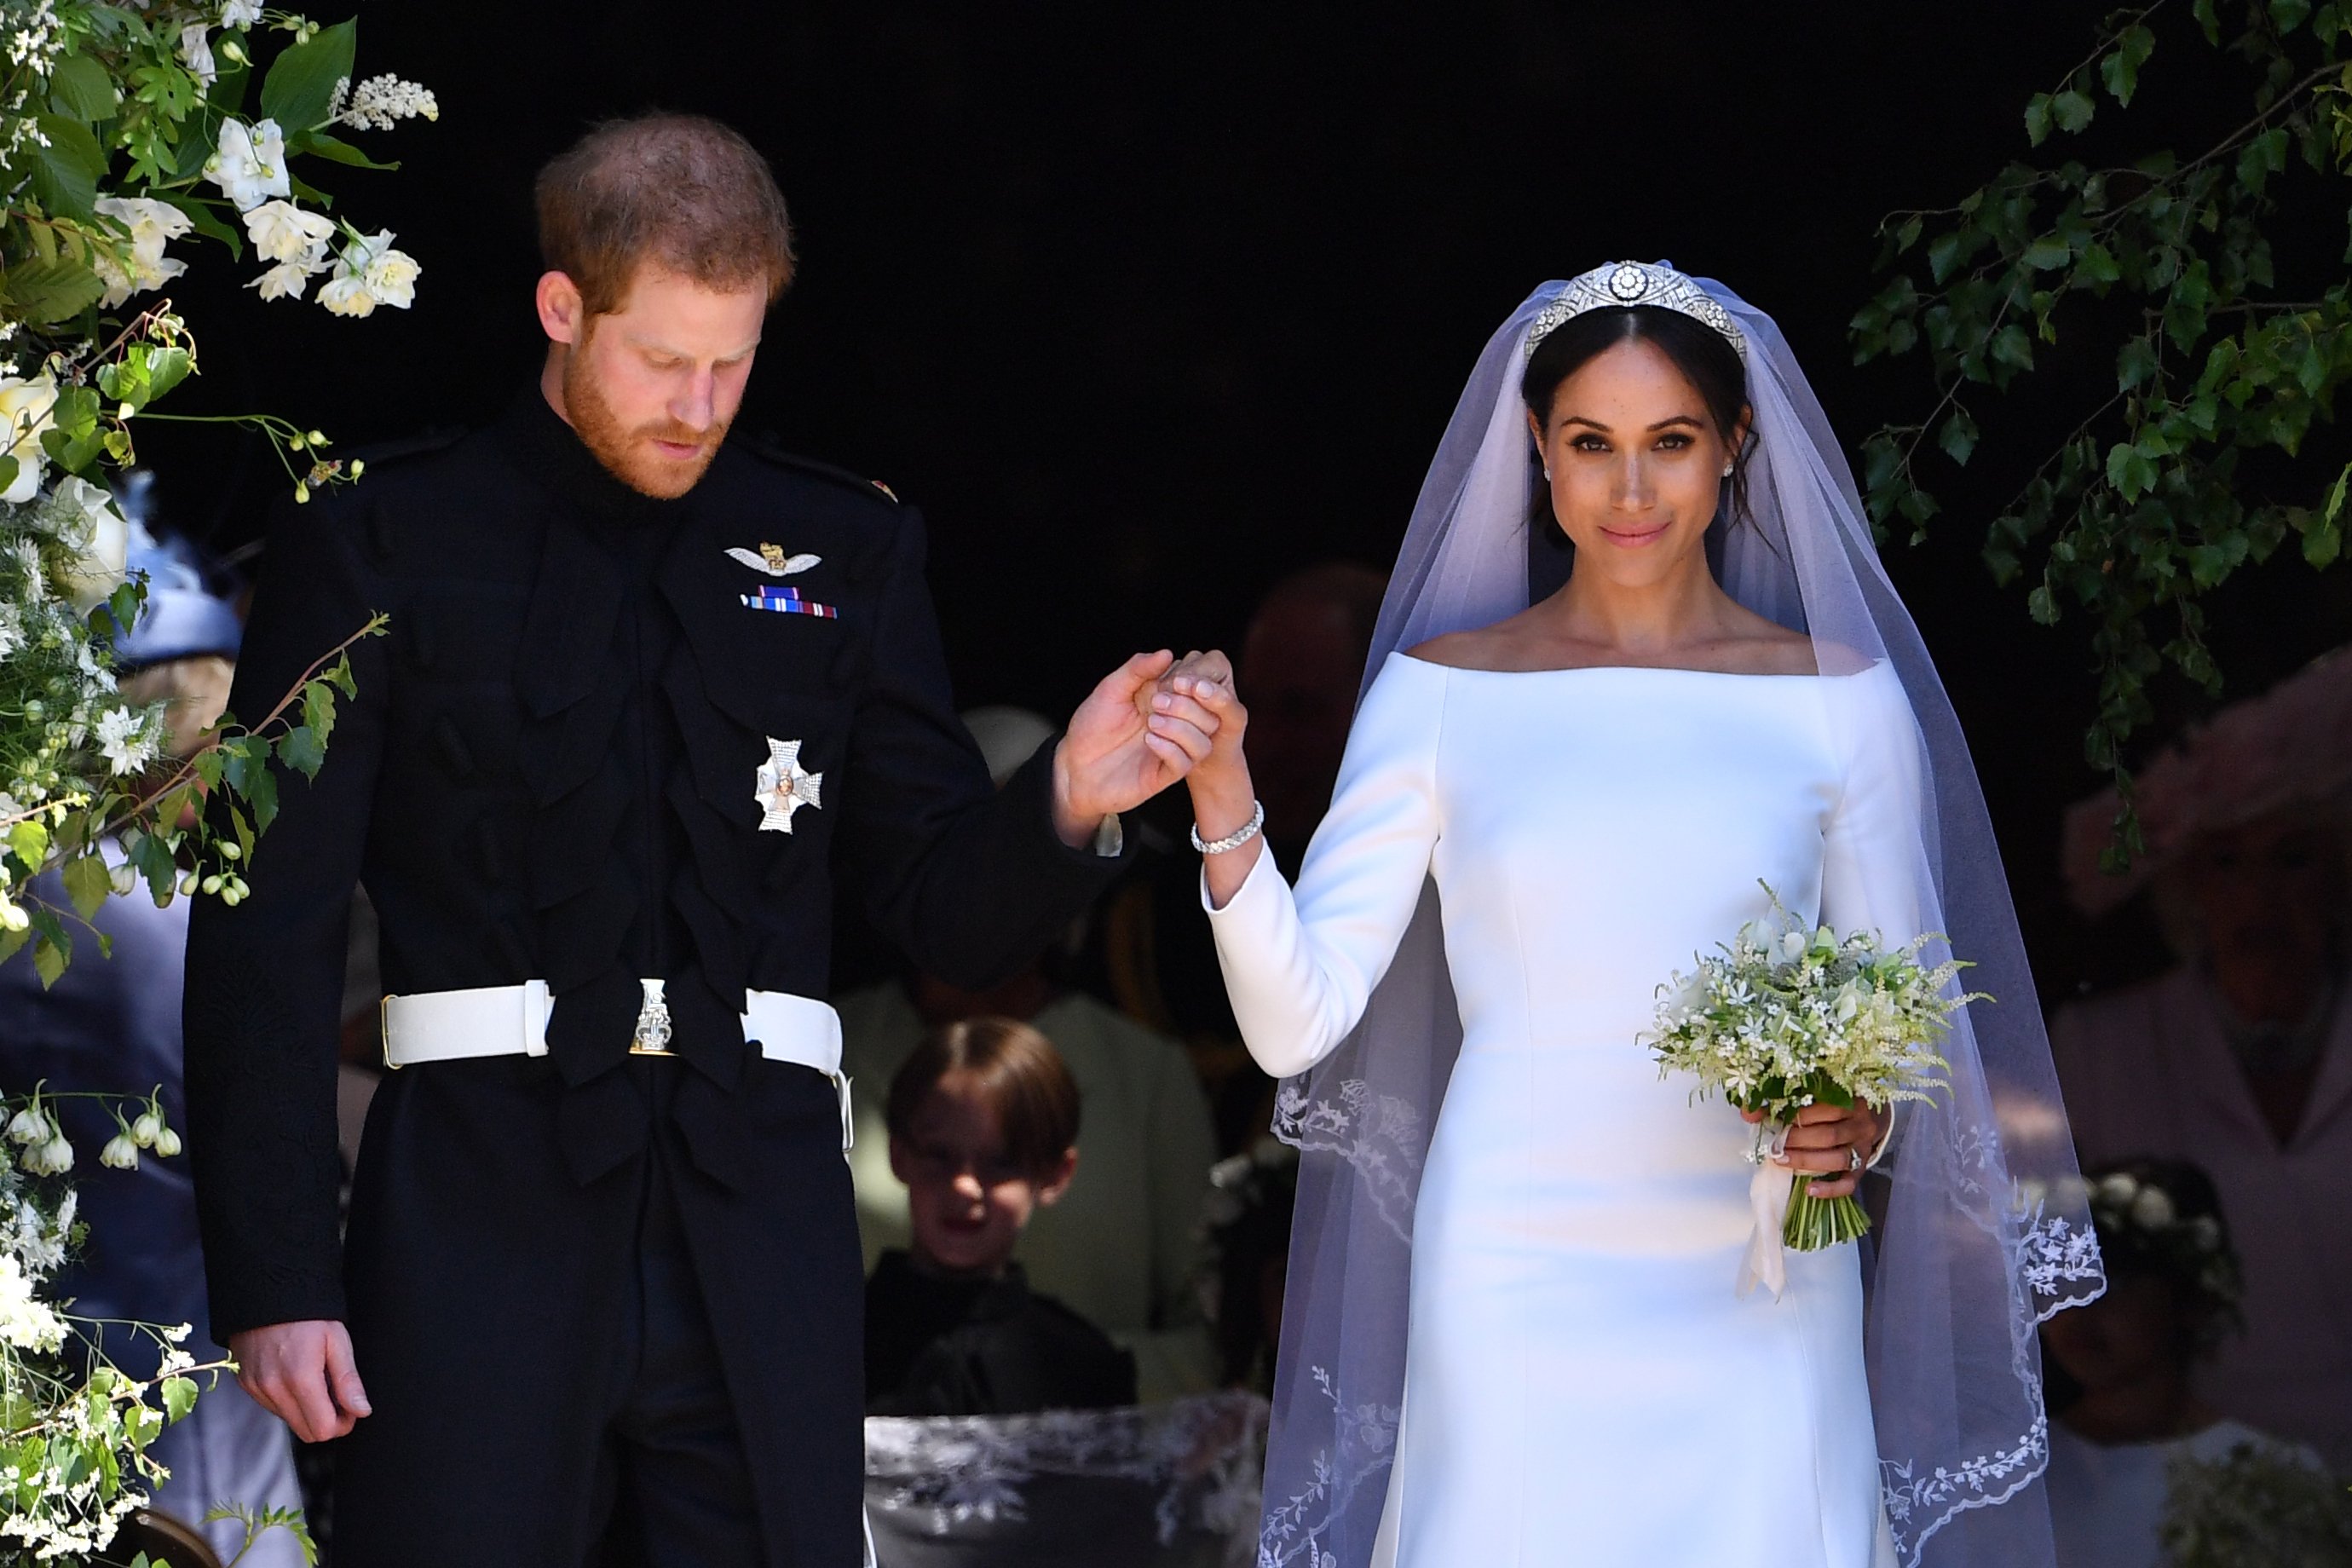 Prince Harry and Meghan Markle exit the West Door of St George's Chapel following royal wedding